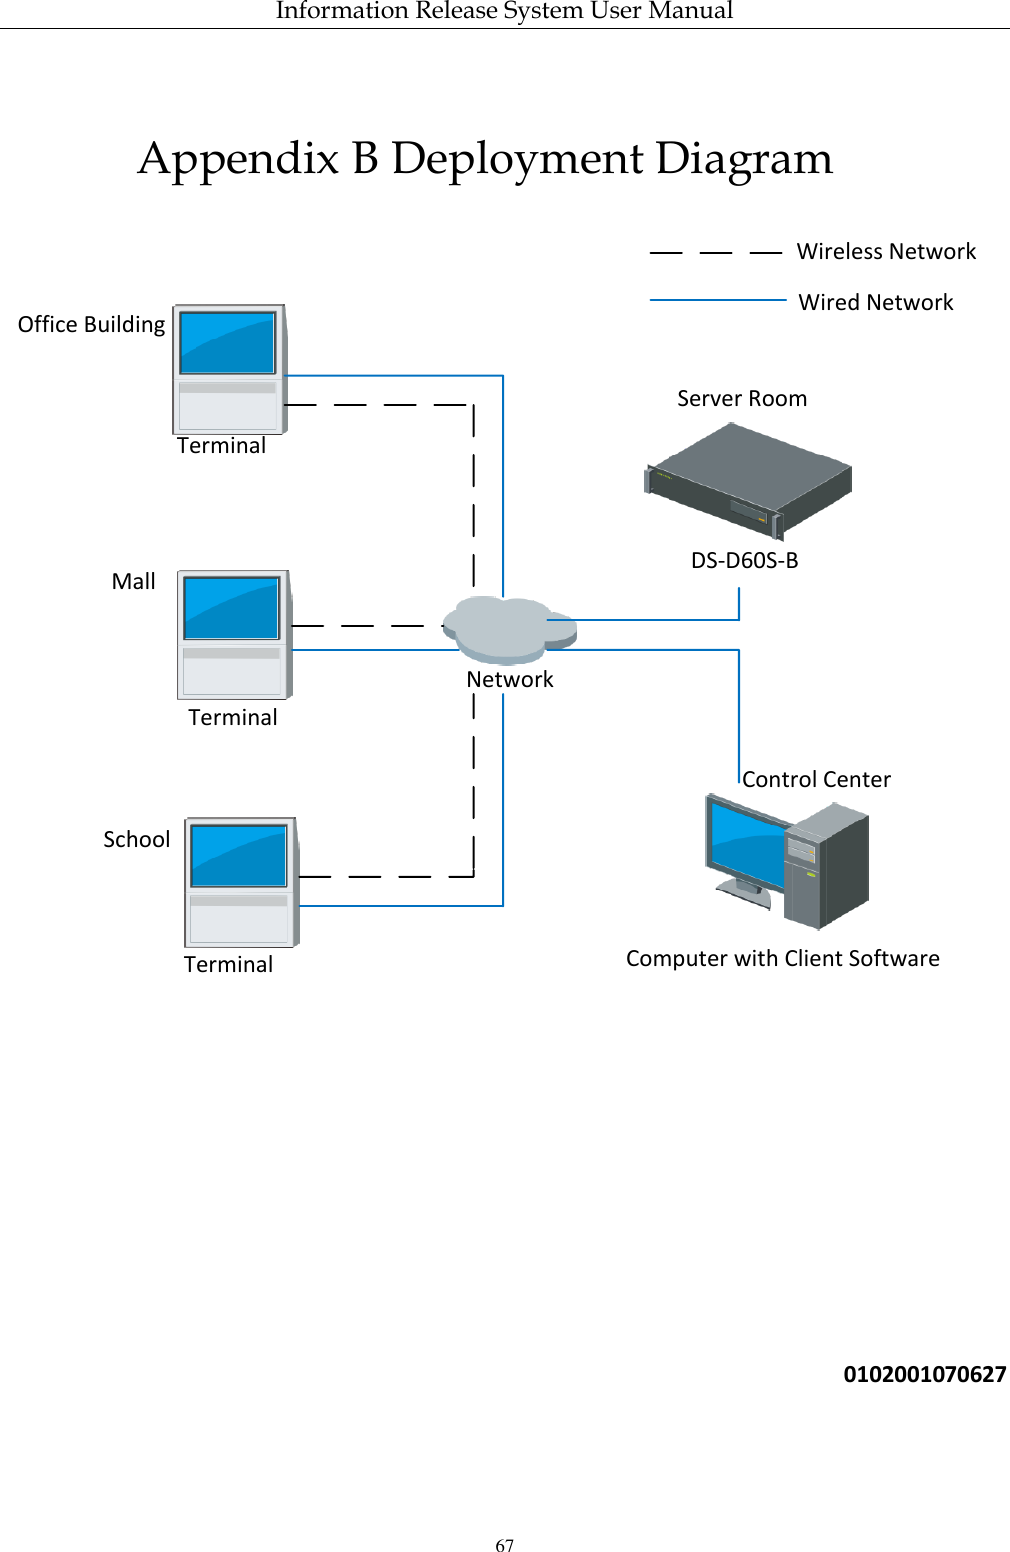 Information Release System User Manual 67 Appendix B Deployment Diagram TerminalTerminalTerminal Computer with Client SoftwareDS-D60S-BNetworkOffice BuildingMallSchoolServer RoomControl CenterWireless NetworkWired Network       0102001070627  